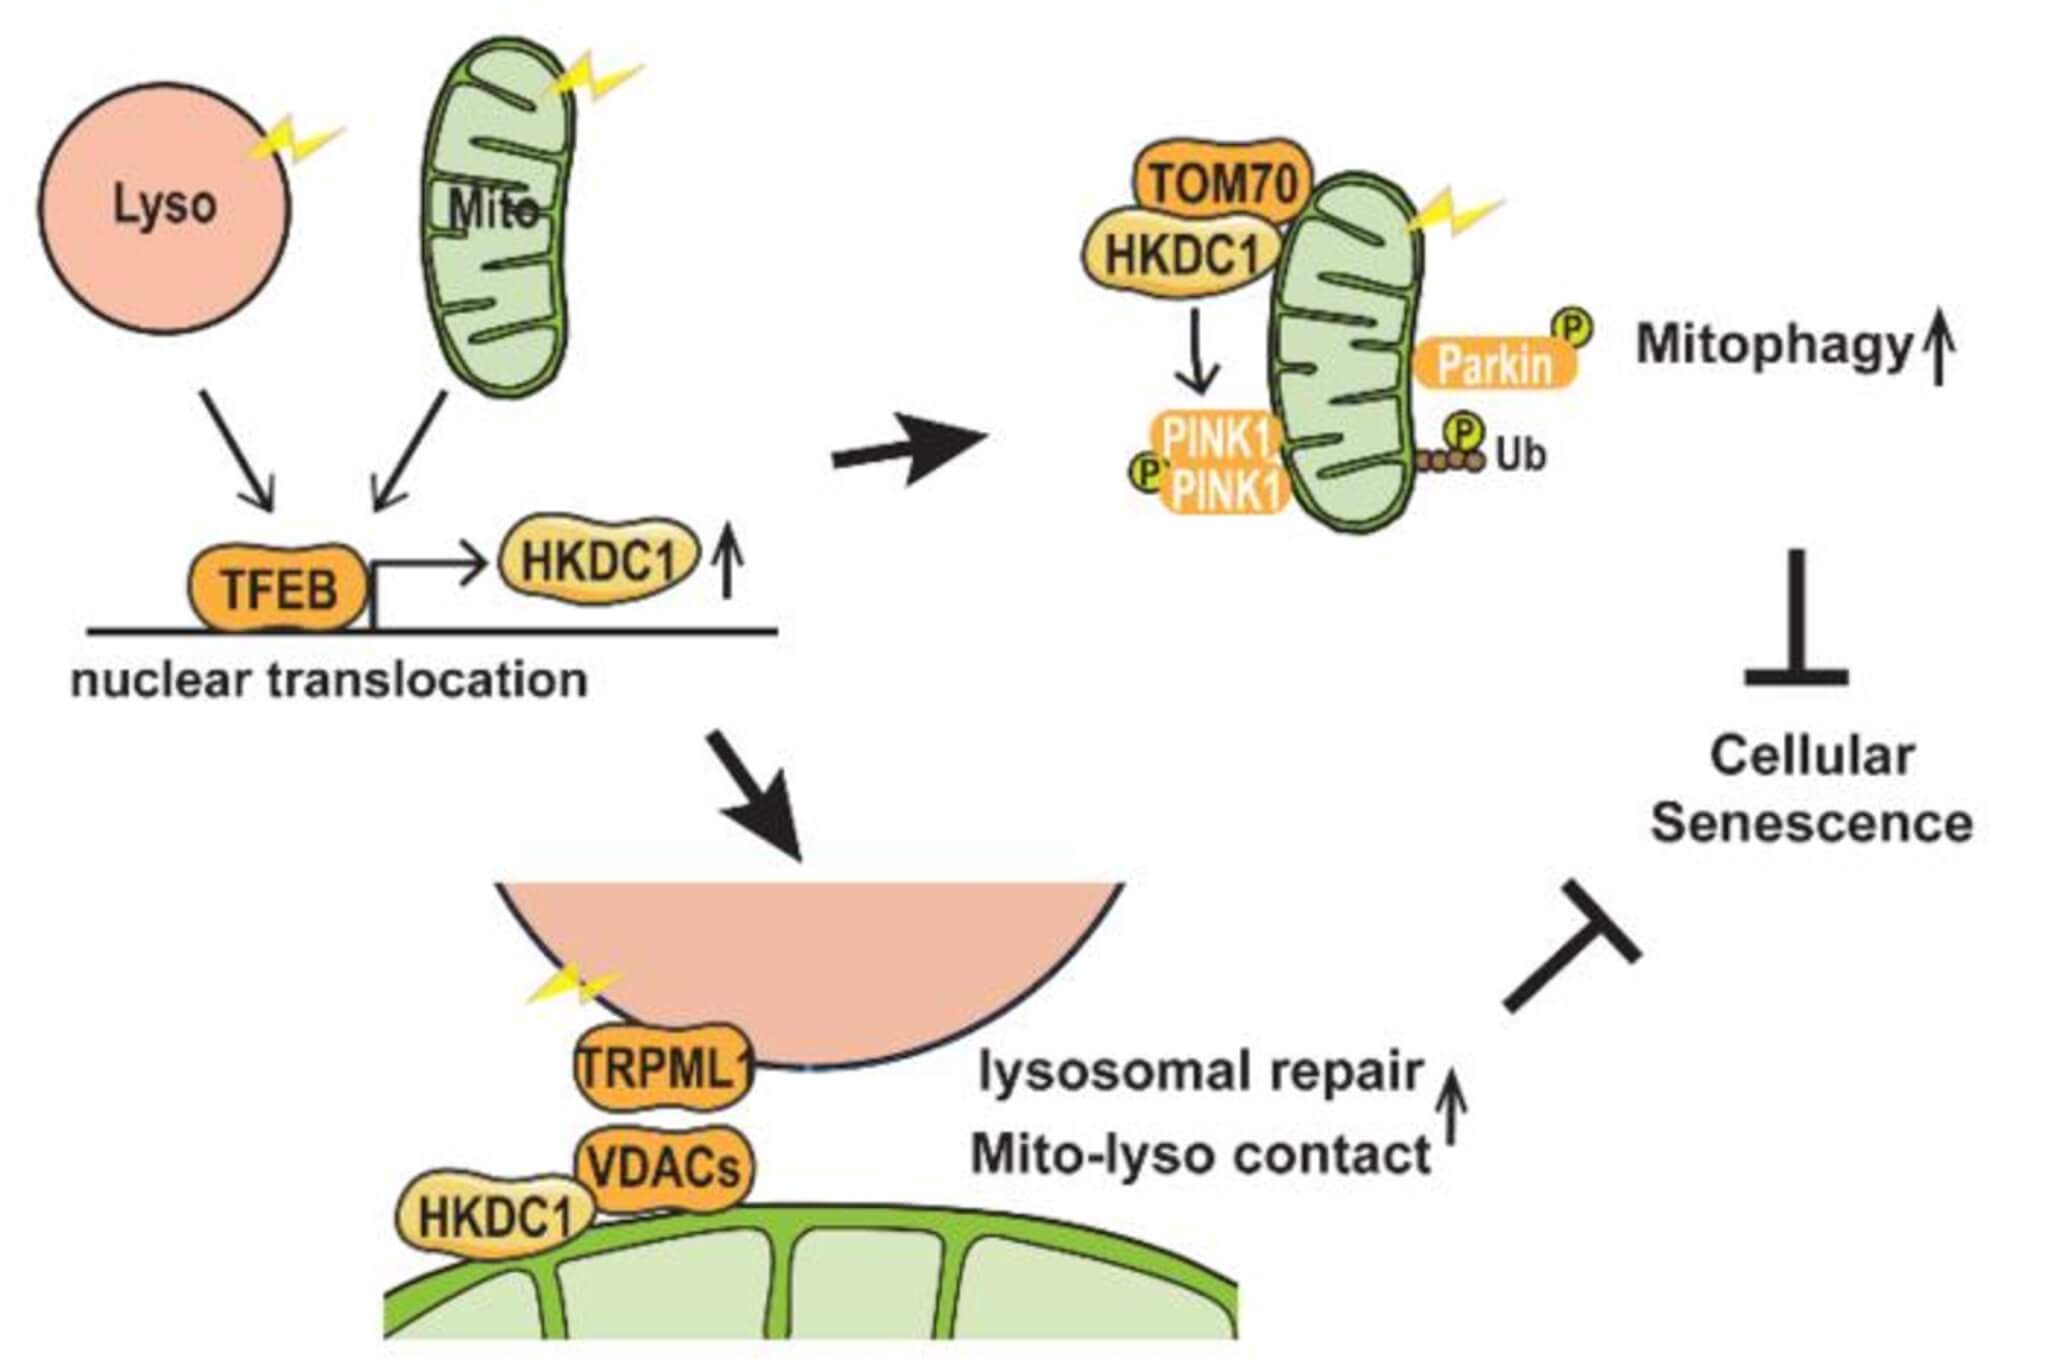 Both mitochondrial and lysosomal stress stimulate TFEB nuclear translocation, followed by increased HKDC1 expression